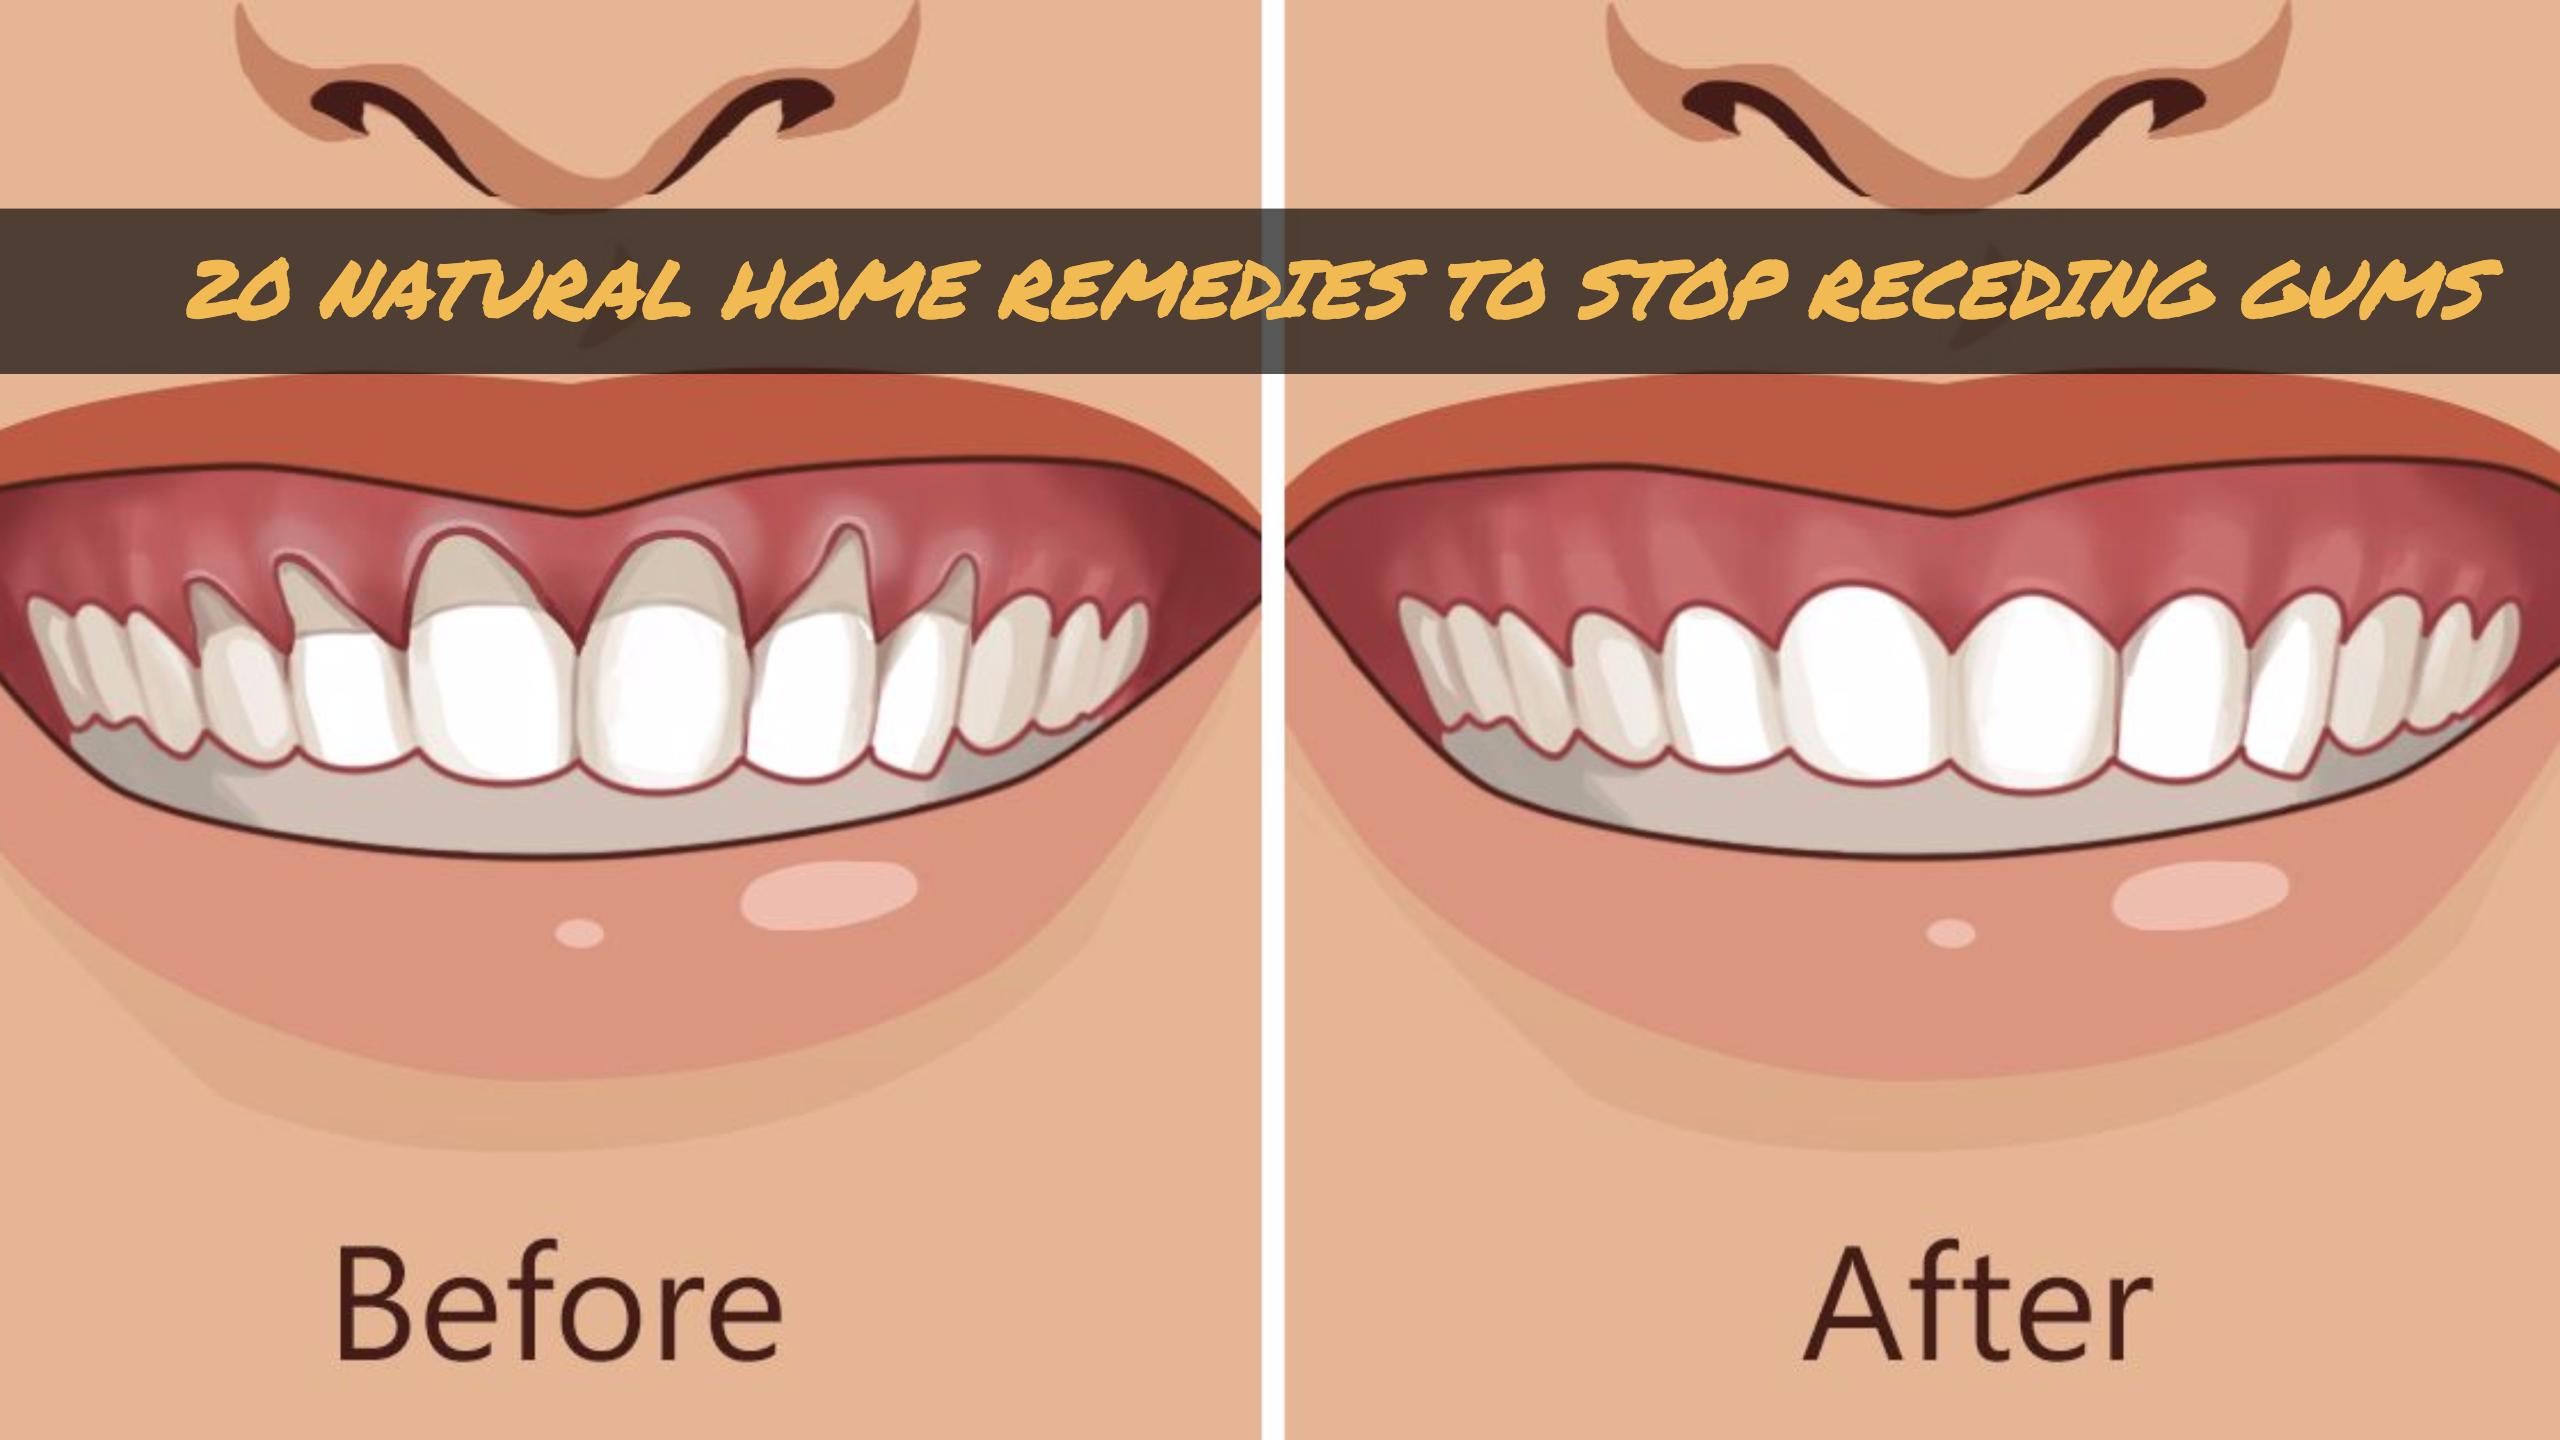 Home Remedies for receding gums